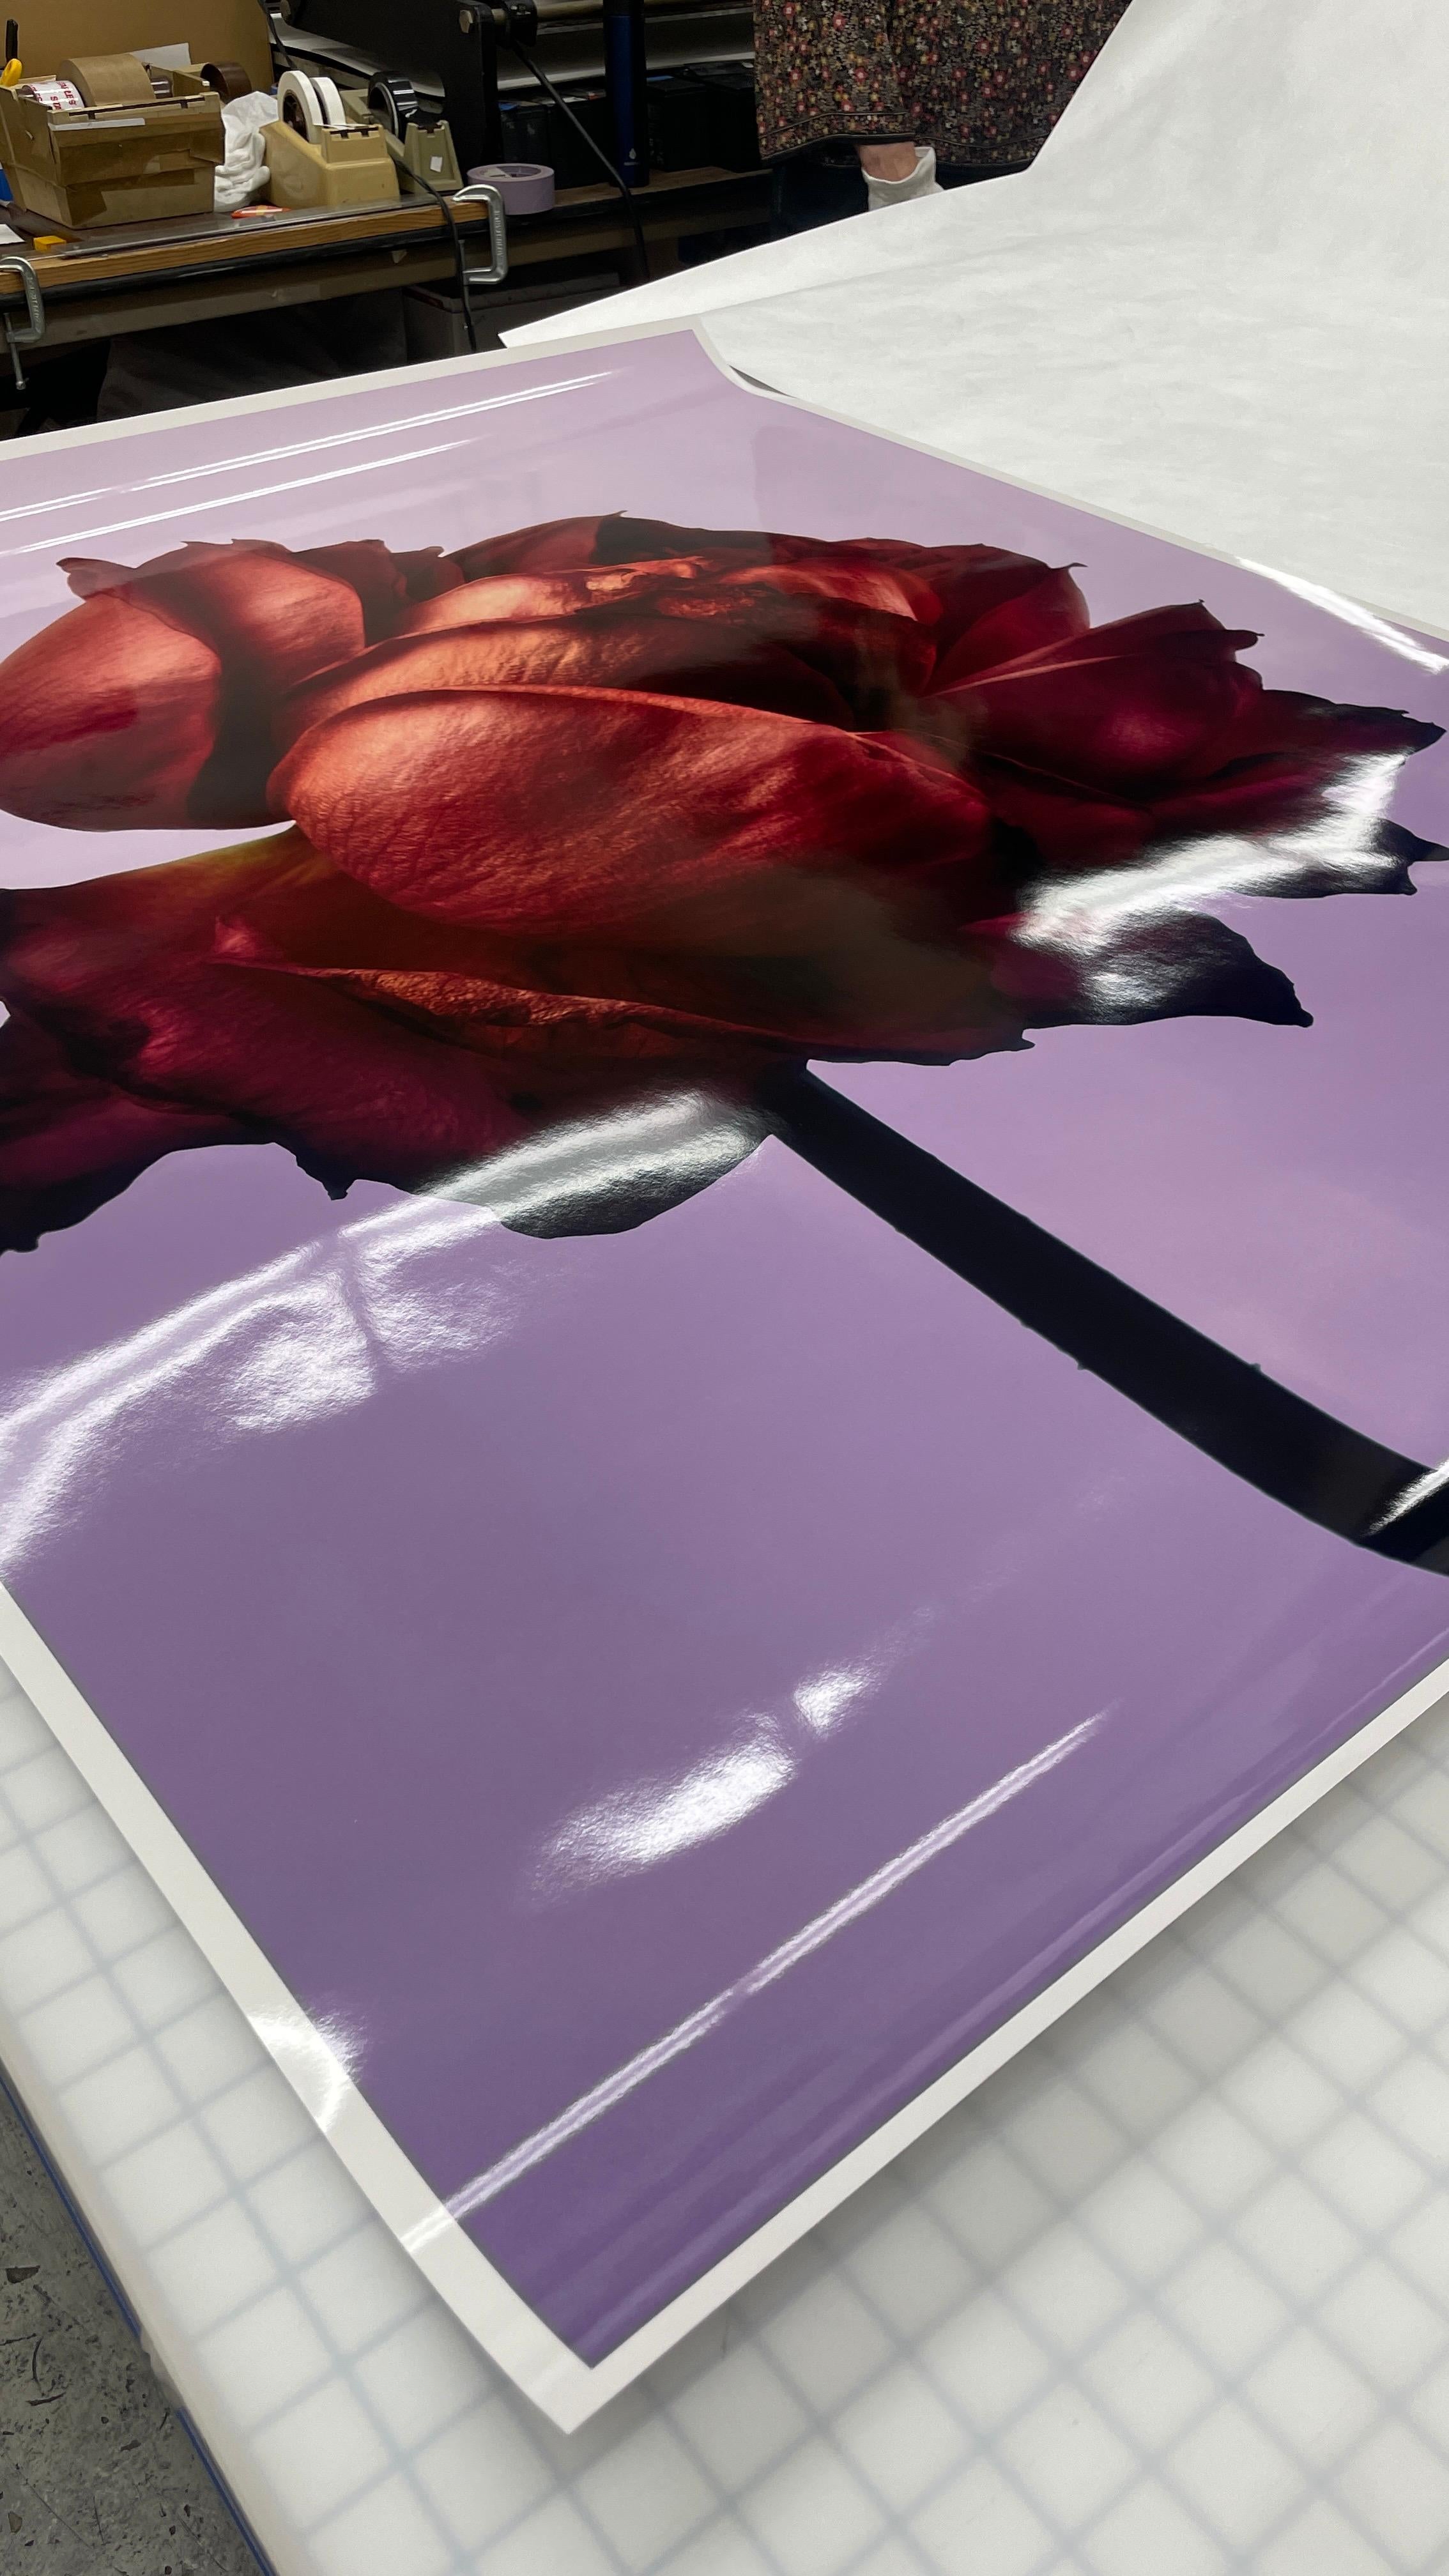 Rose, C-Print edition 5 of 5. - Photograph by Mario Kroes